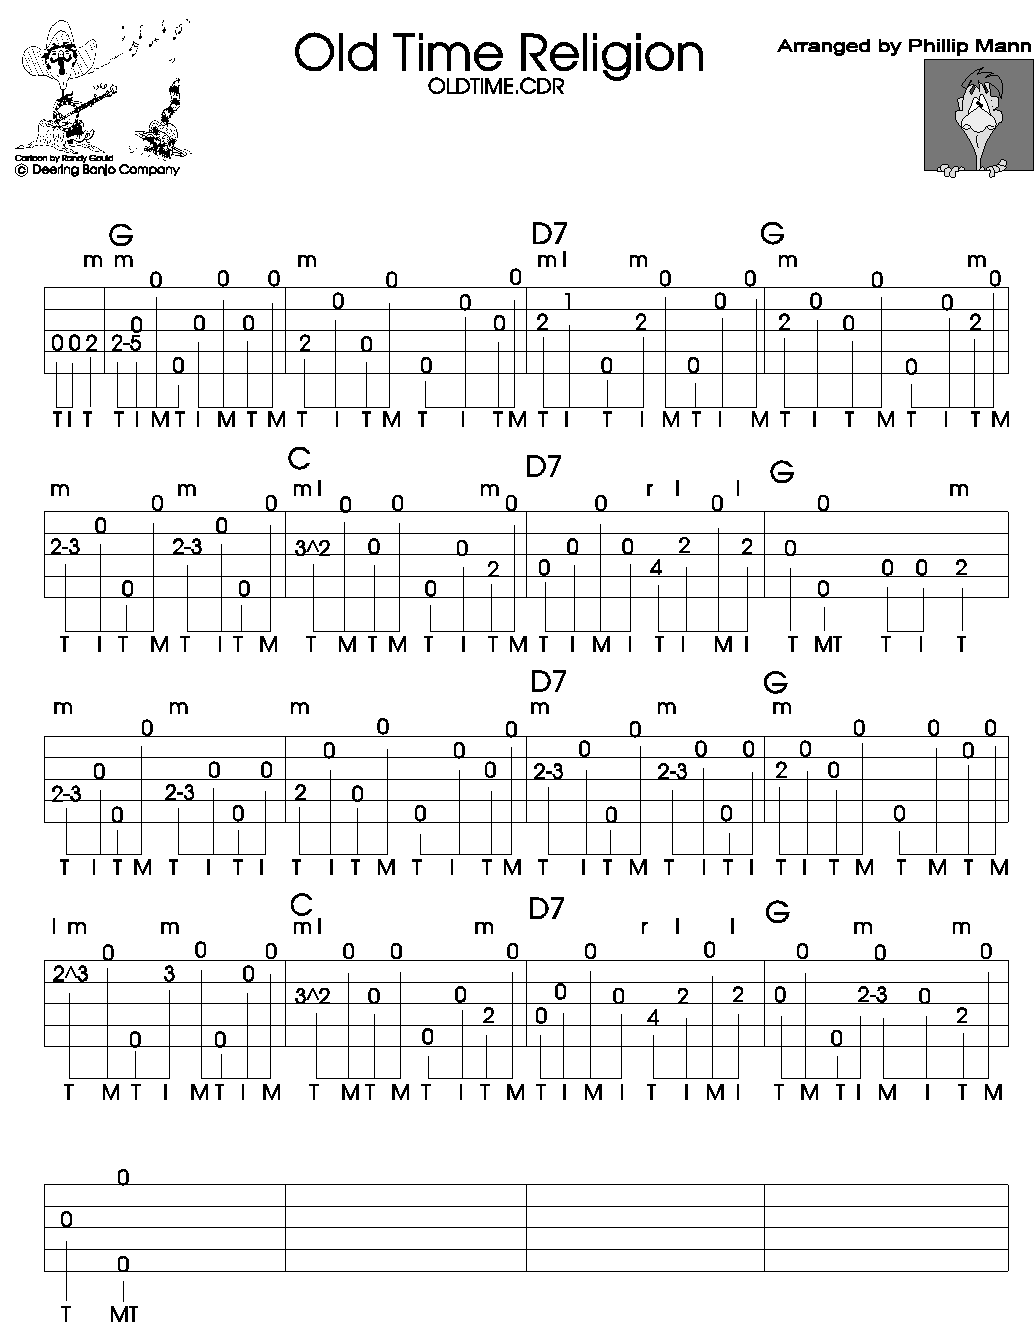 Old-Time American Waltzes for Tenor Banjo - Fake Songbook in the key of D  and G with Tabs and Chords